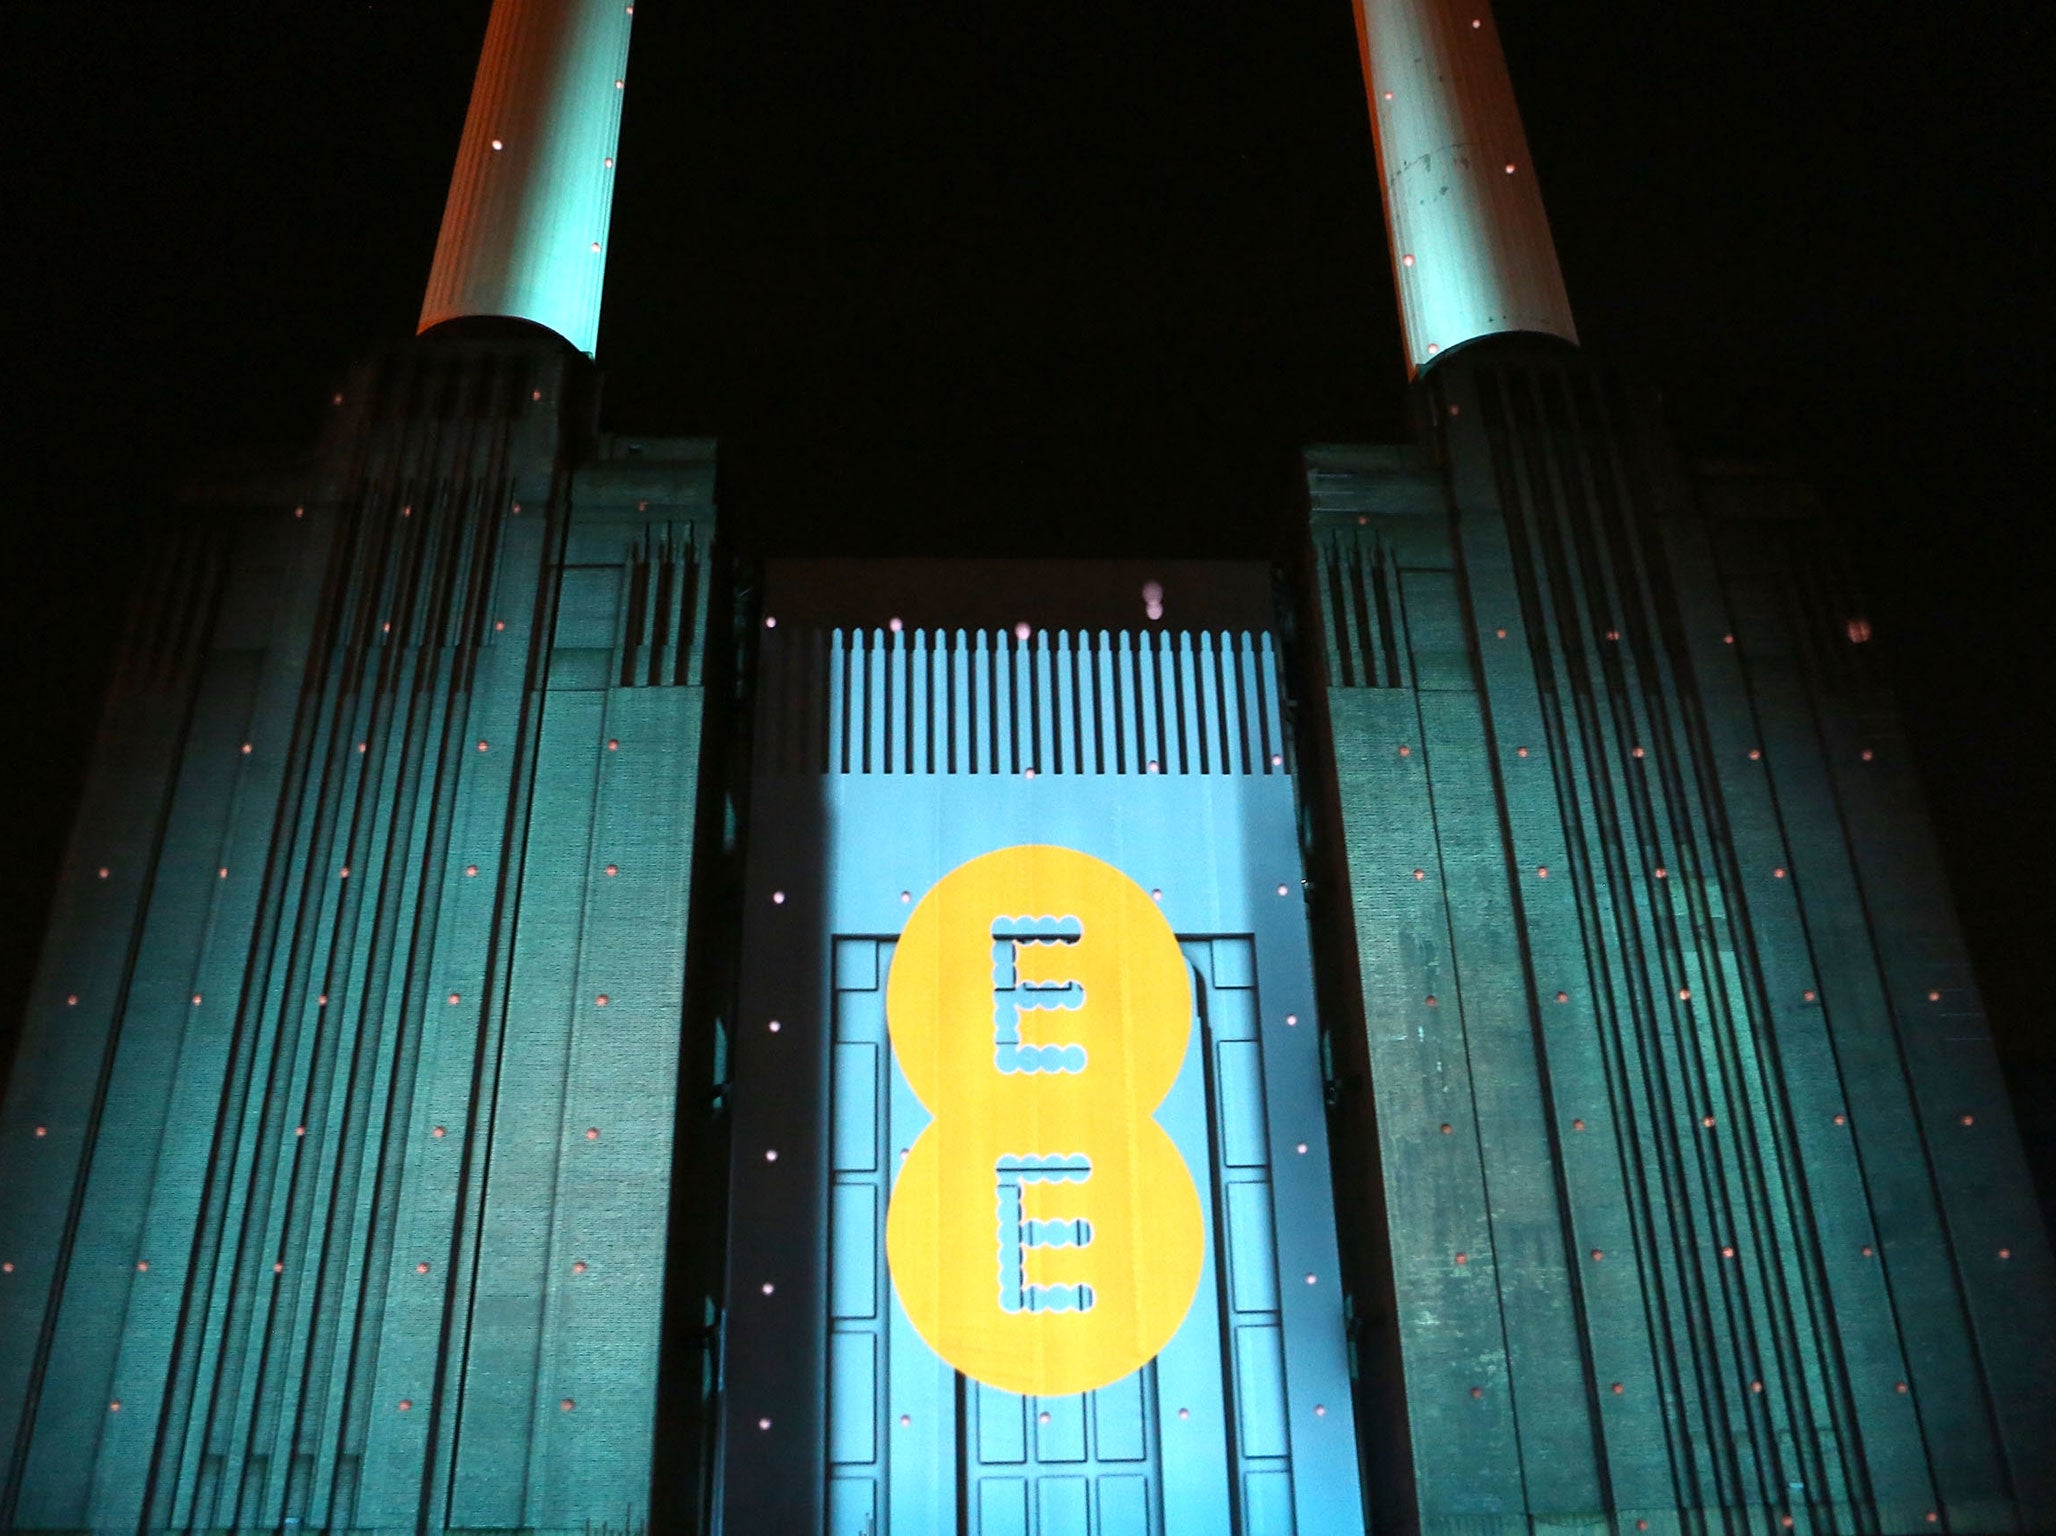 Atmosphere during a 4D projection at the launch of EE, Britain's first 4G mobile network at Battersea Power station on November 1, 2012 in London, England